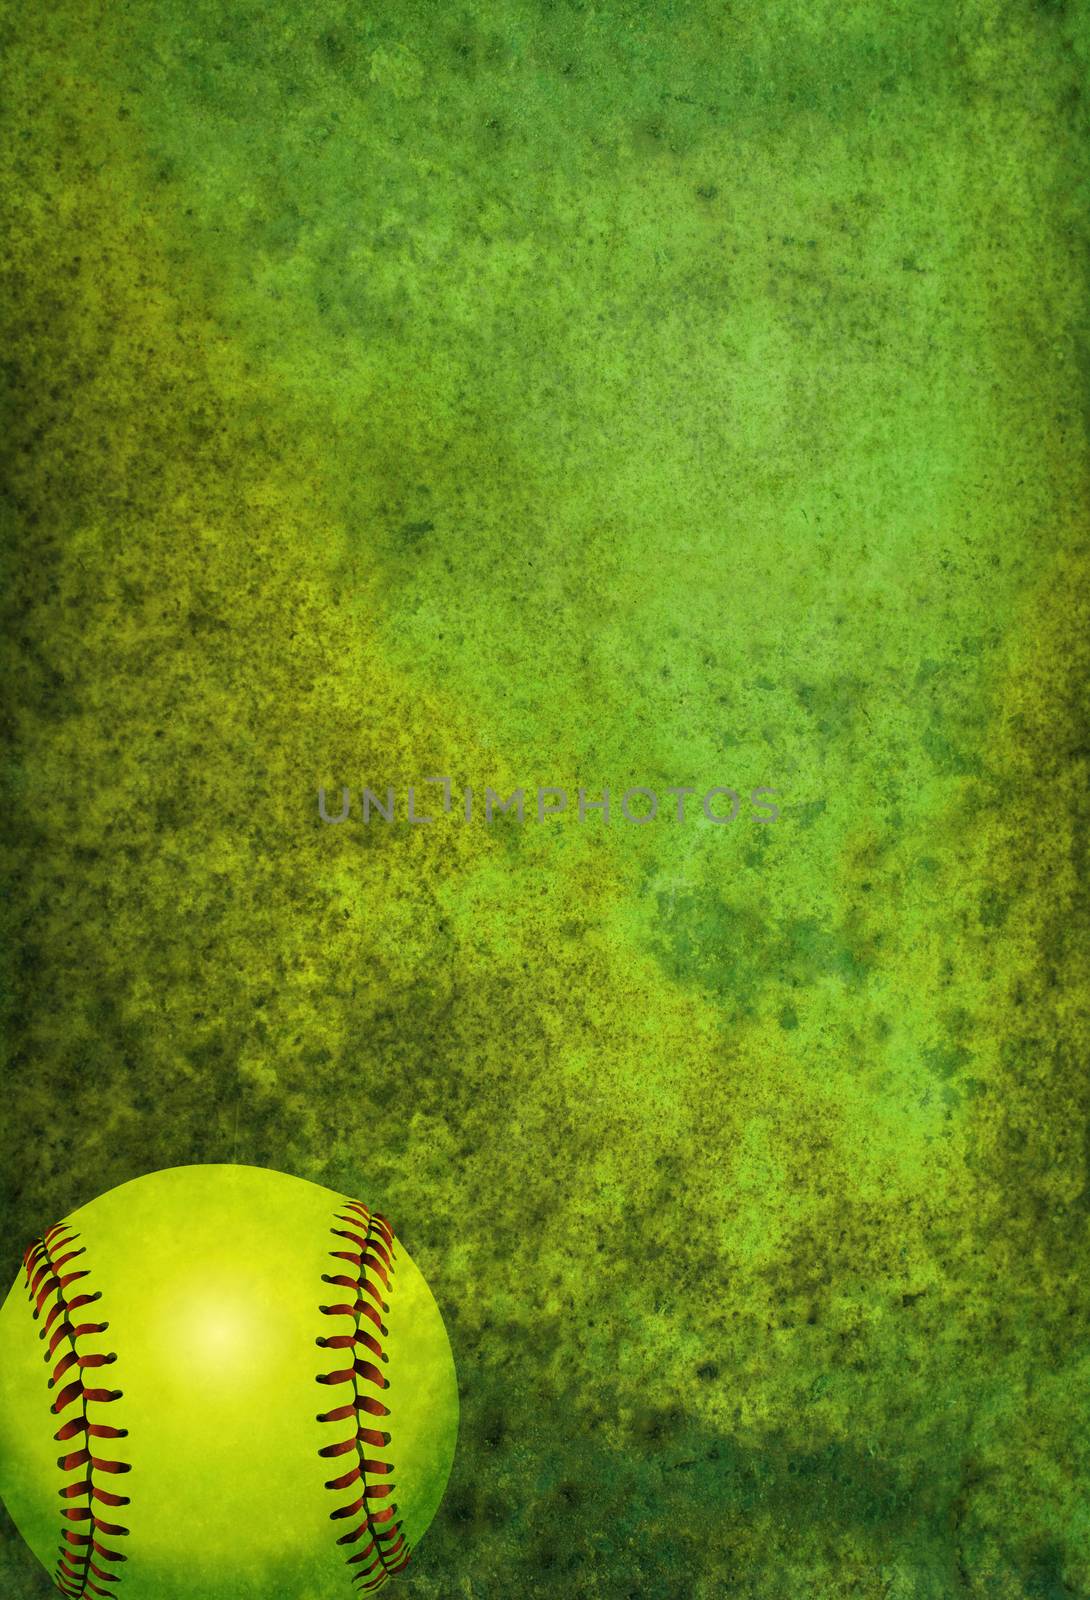 A green textured softball background with ball. Room for copy.